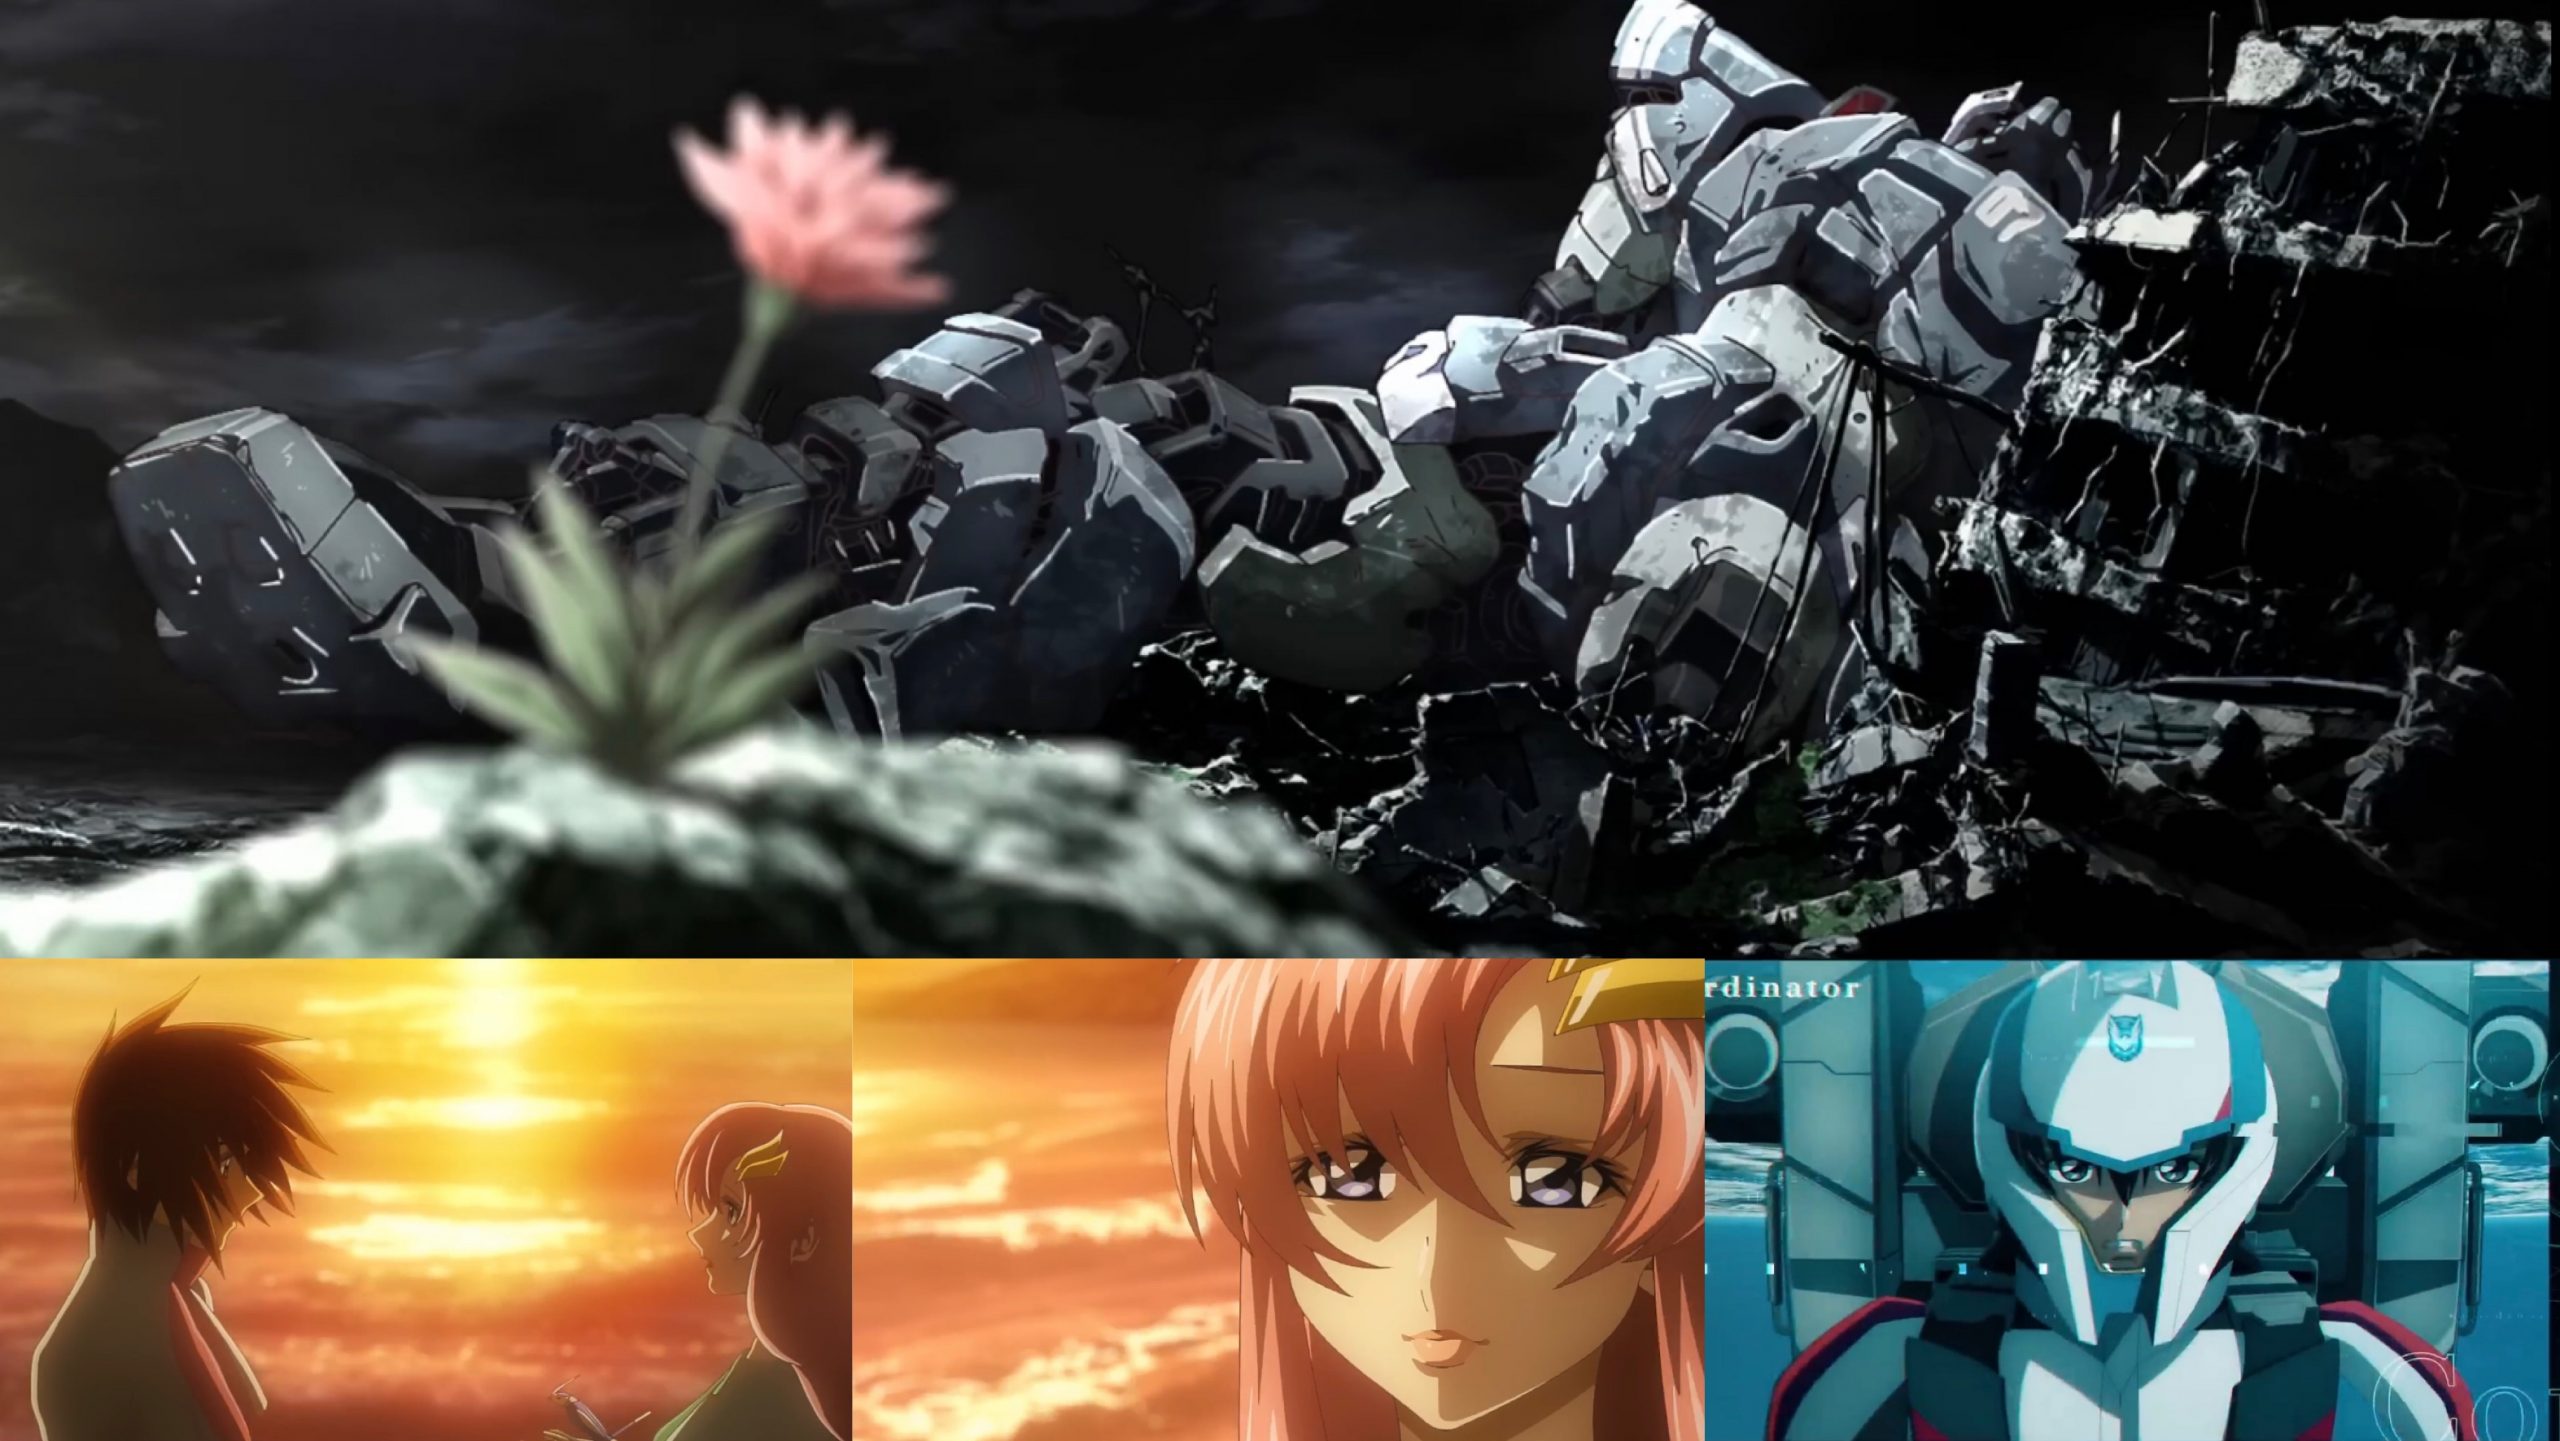 Mobile Suit Gundam SEED Anime  TV Tropes